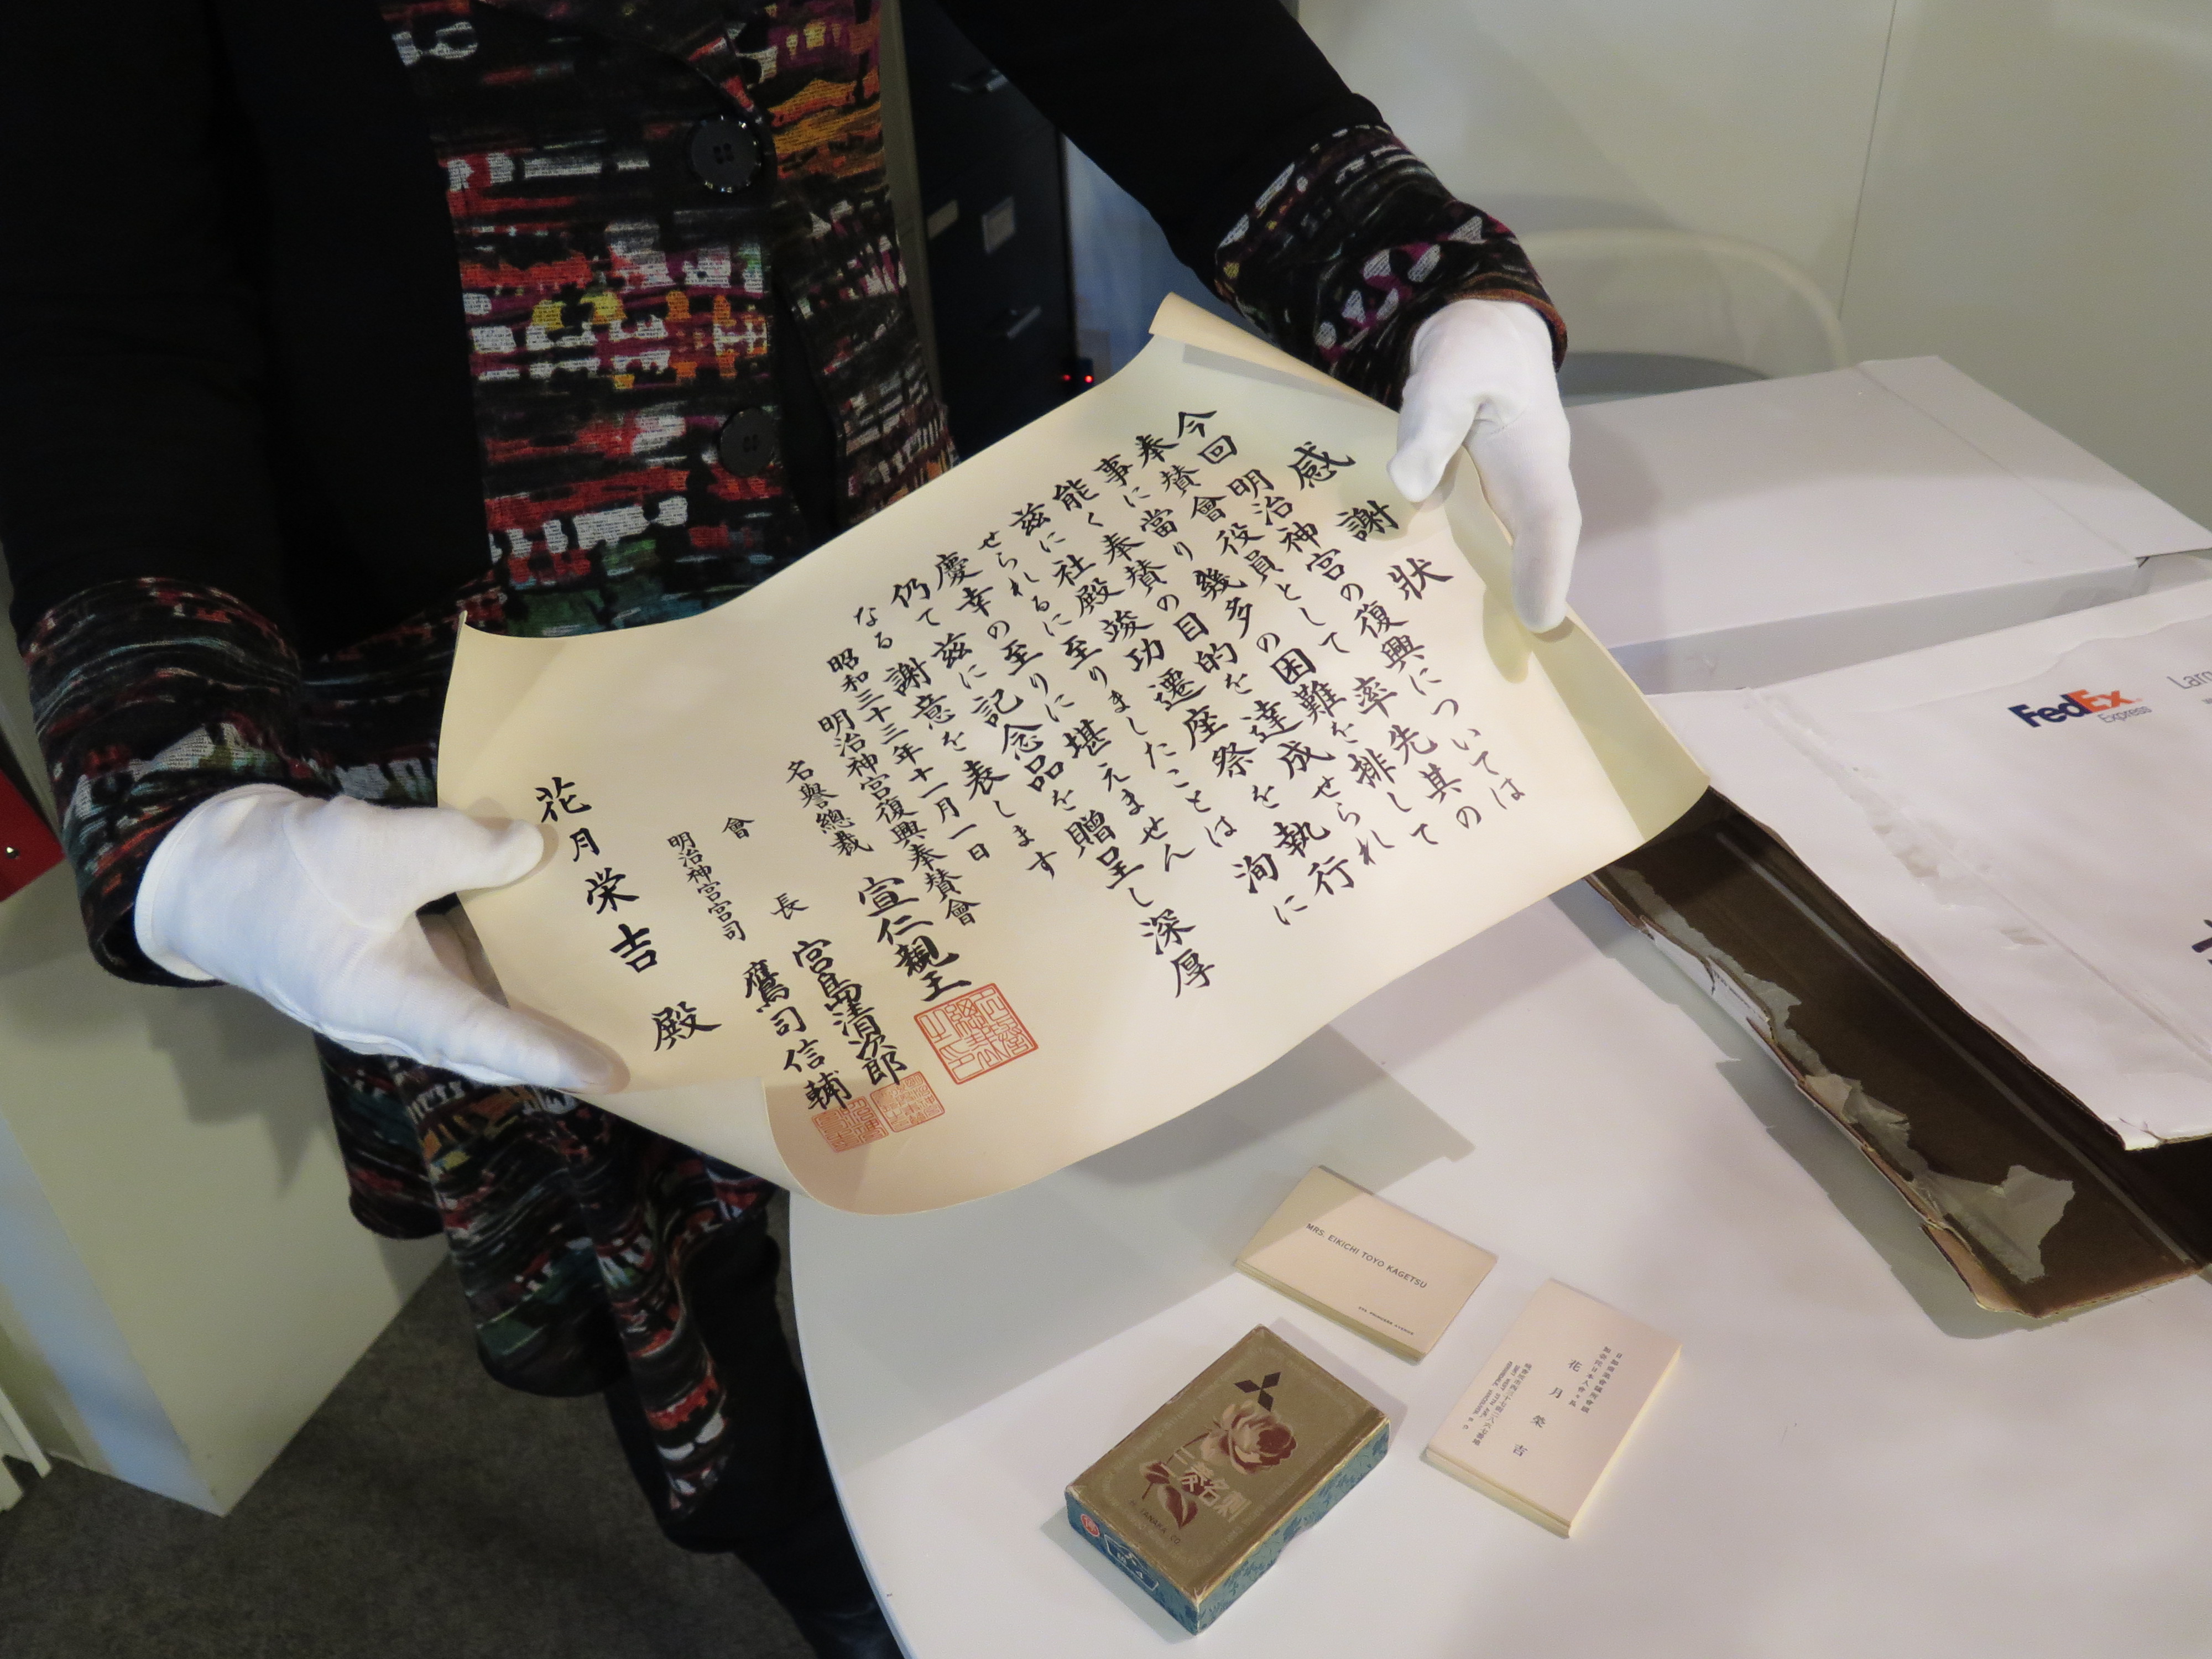 NNMCC Research Archivist Linda Kawamoto Reid displays a scroll after donning protective gloves to handle the historic material. At the time of this photo, the collection was in banker boxes bagged and ready to be placed in an off-site freezer to destroy any mold or insects that may have made its way into the material while it was stored in the Kagetsu family’s North Carolina basement. 